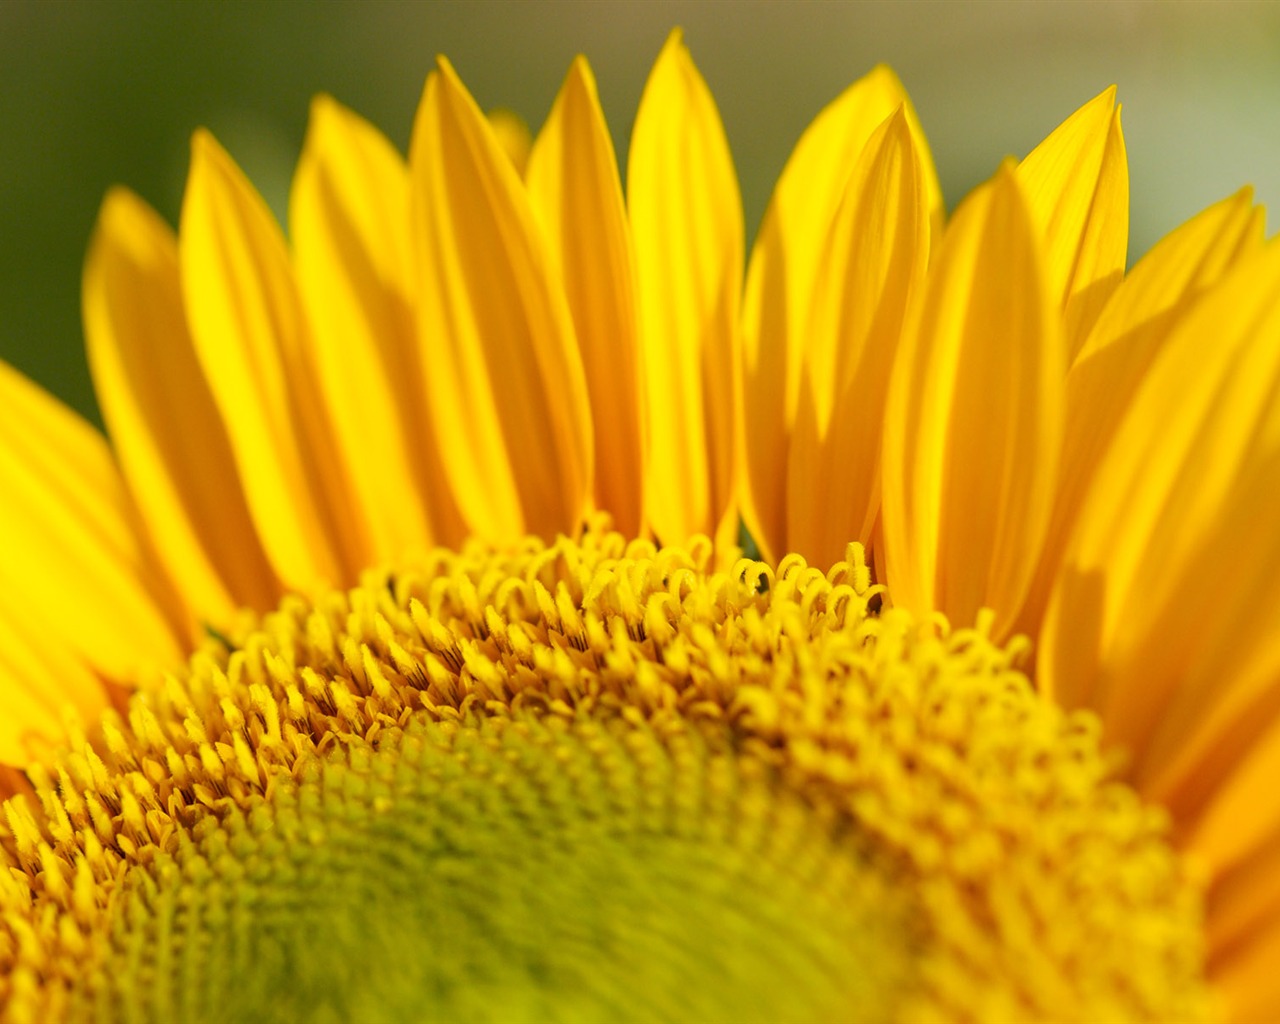 Sunny sunflower photo HD Wallpapers #29 - 1280x1024